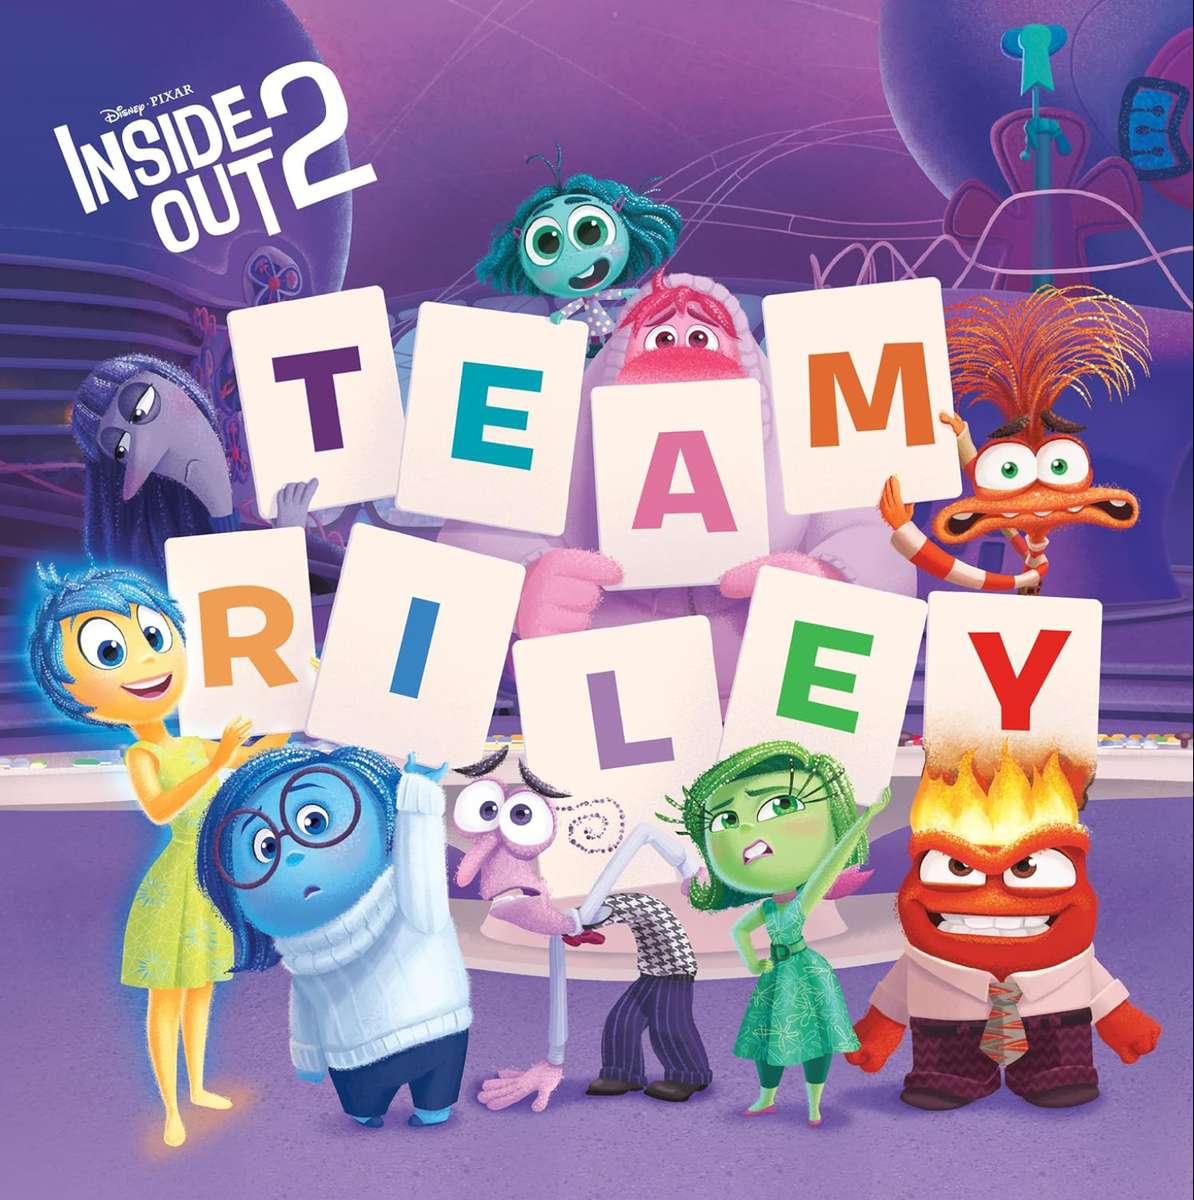 Inside Out 2 Pictureback Book❤️❤️❤️❤️ Pussel online